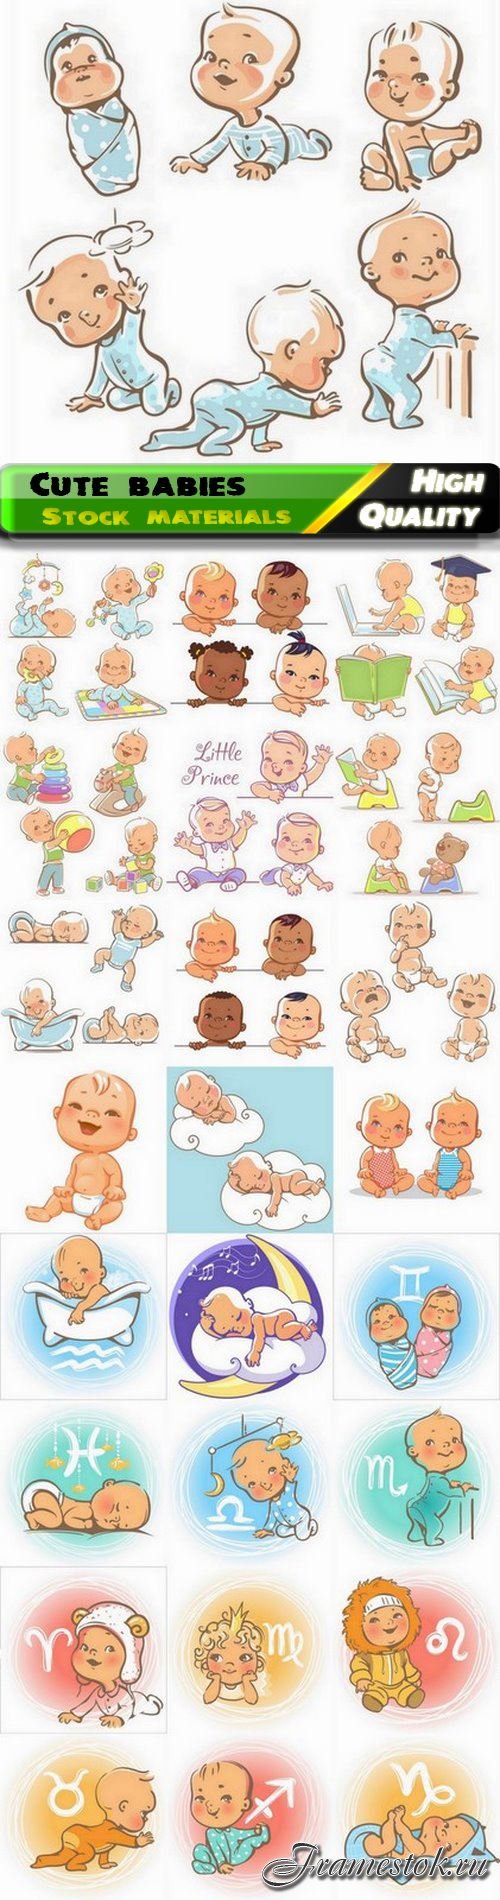 Illustration of cute babies and baby show card elements - 25 Eps